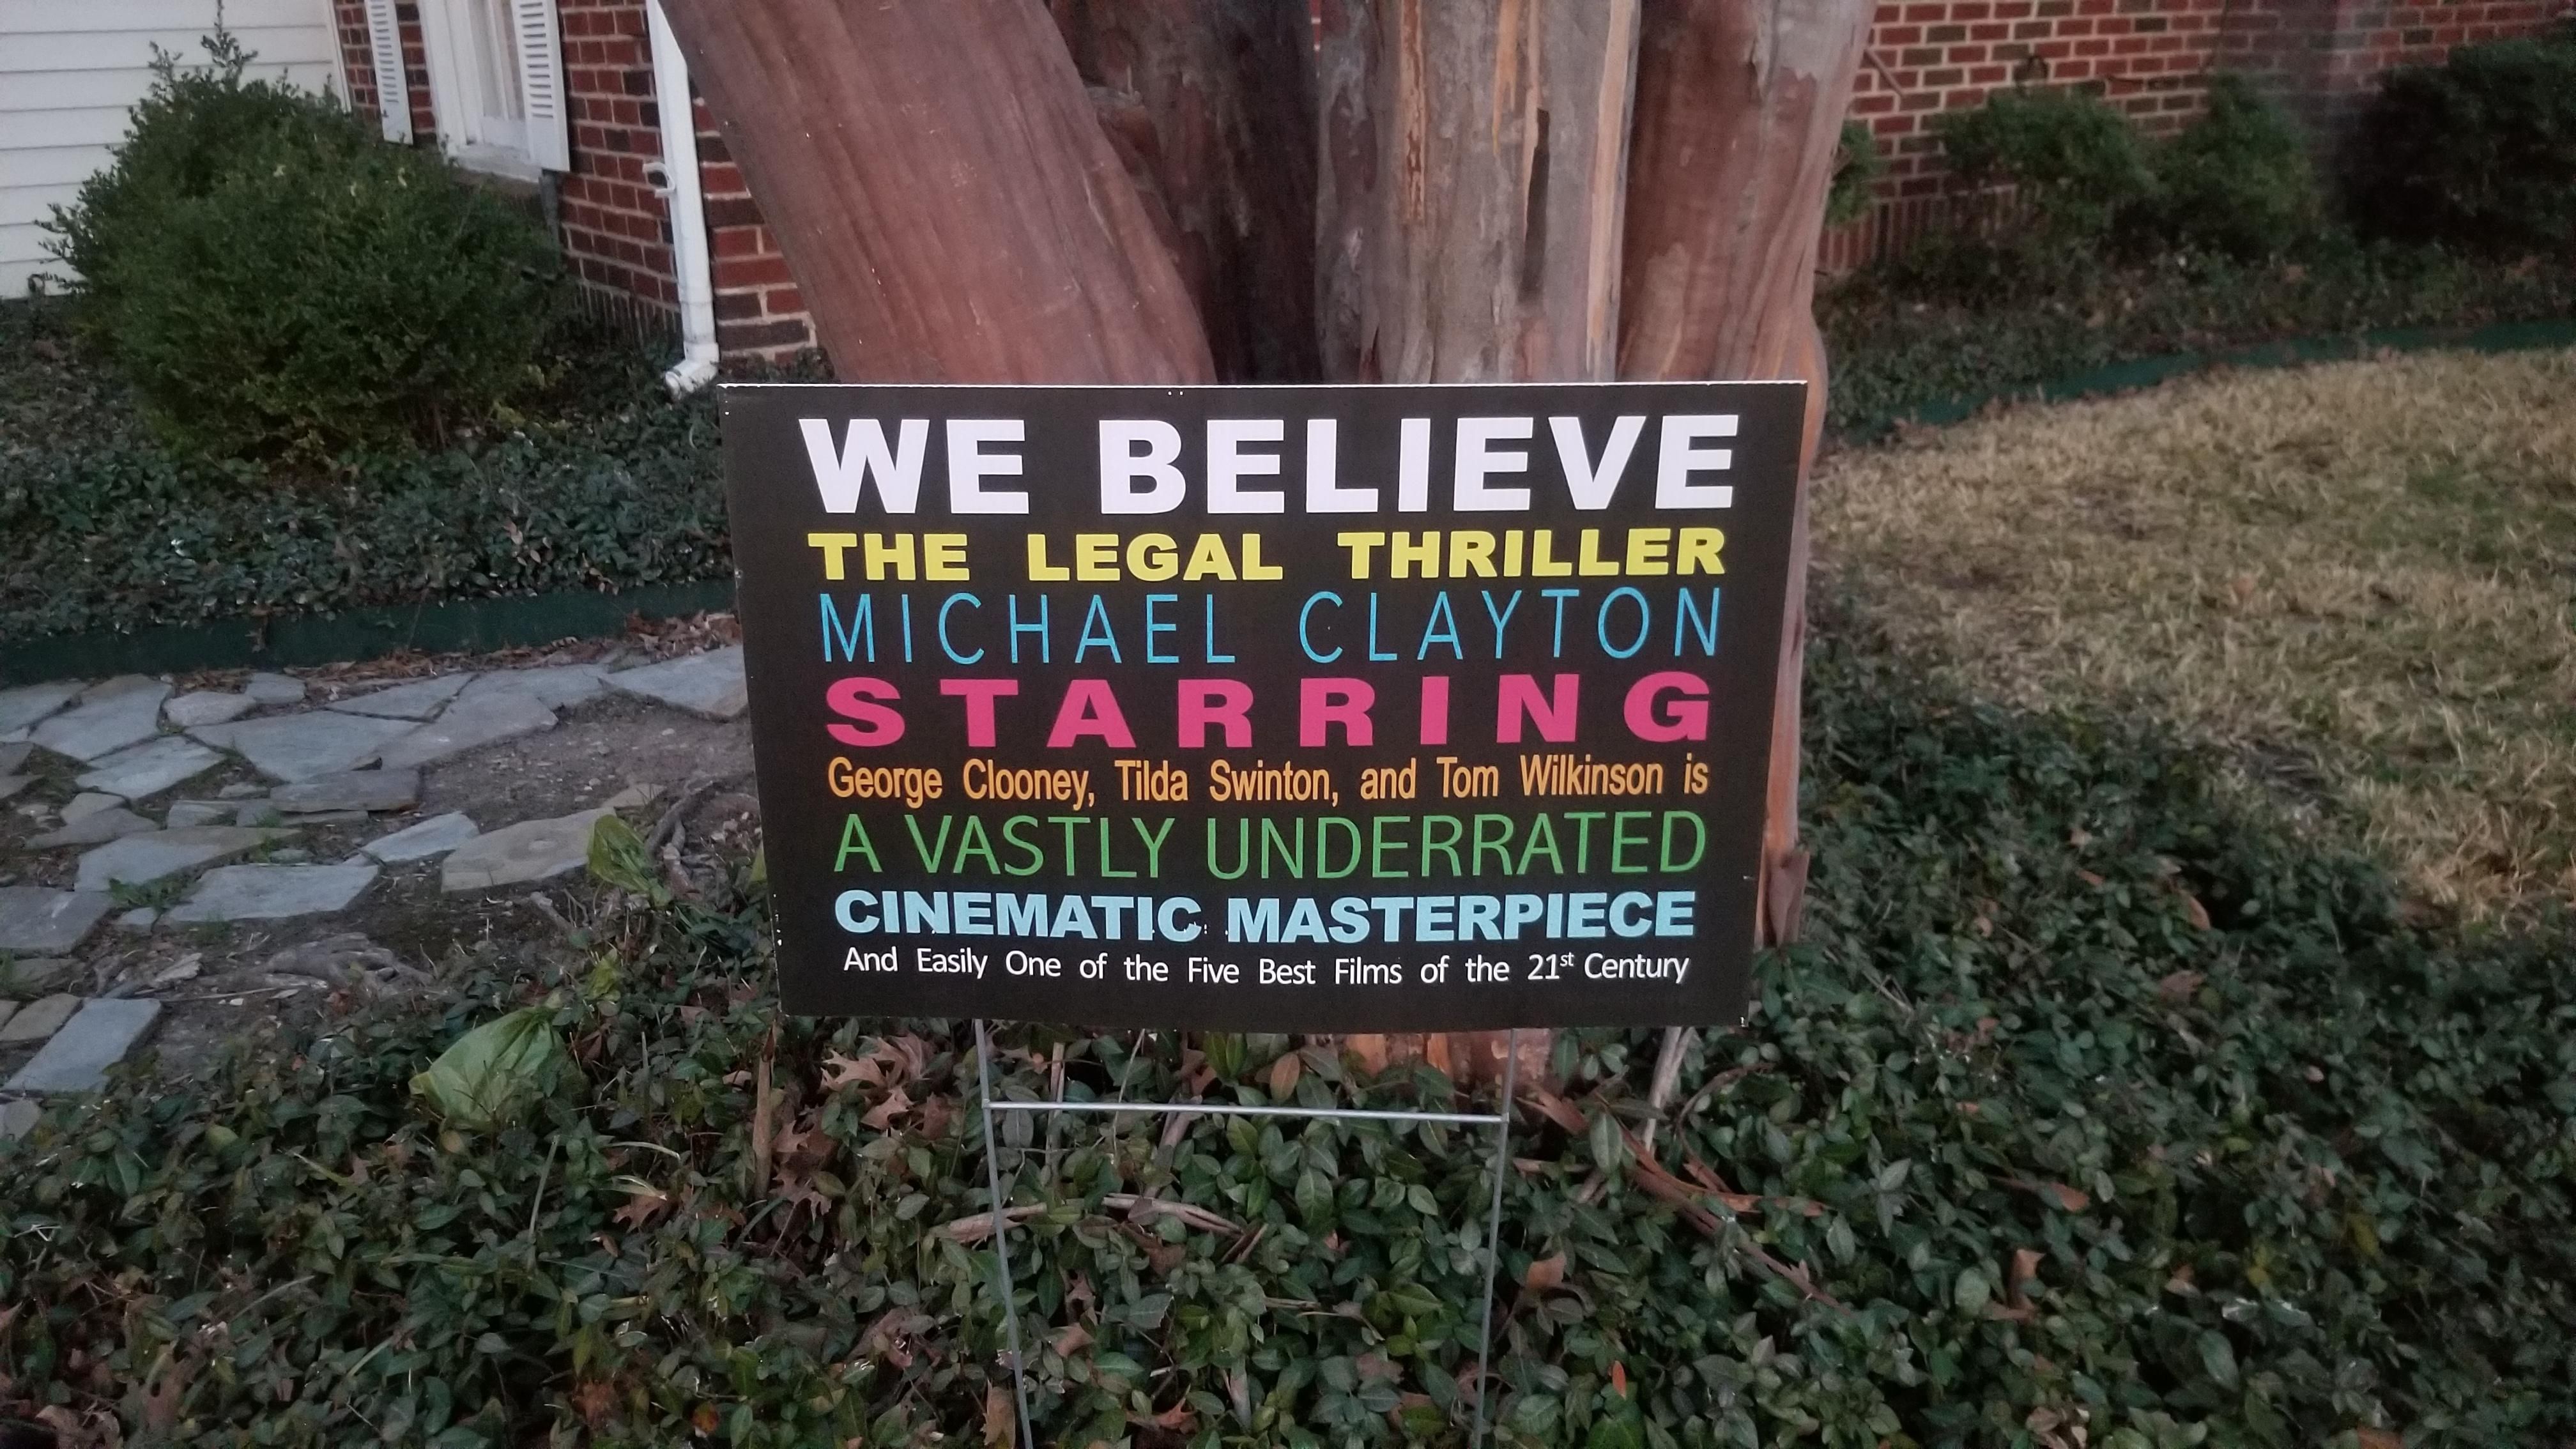 Yard sign in Dallas letting everyone know they think a movie is underrated